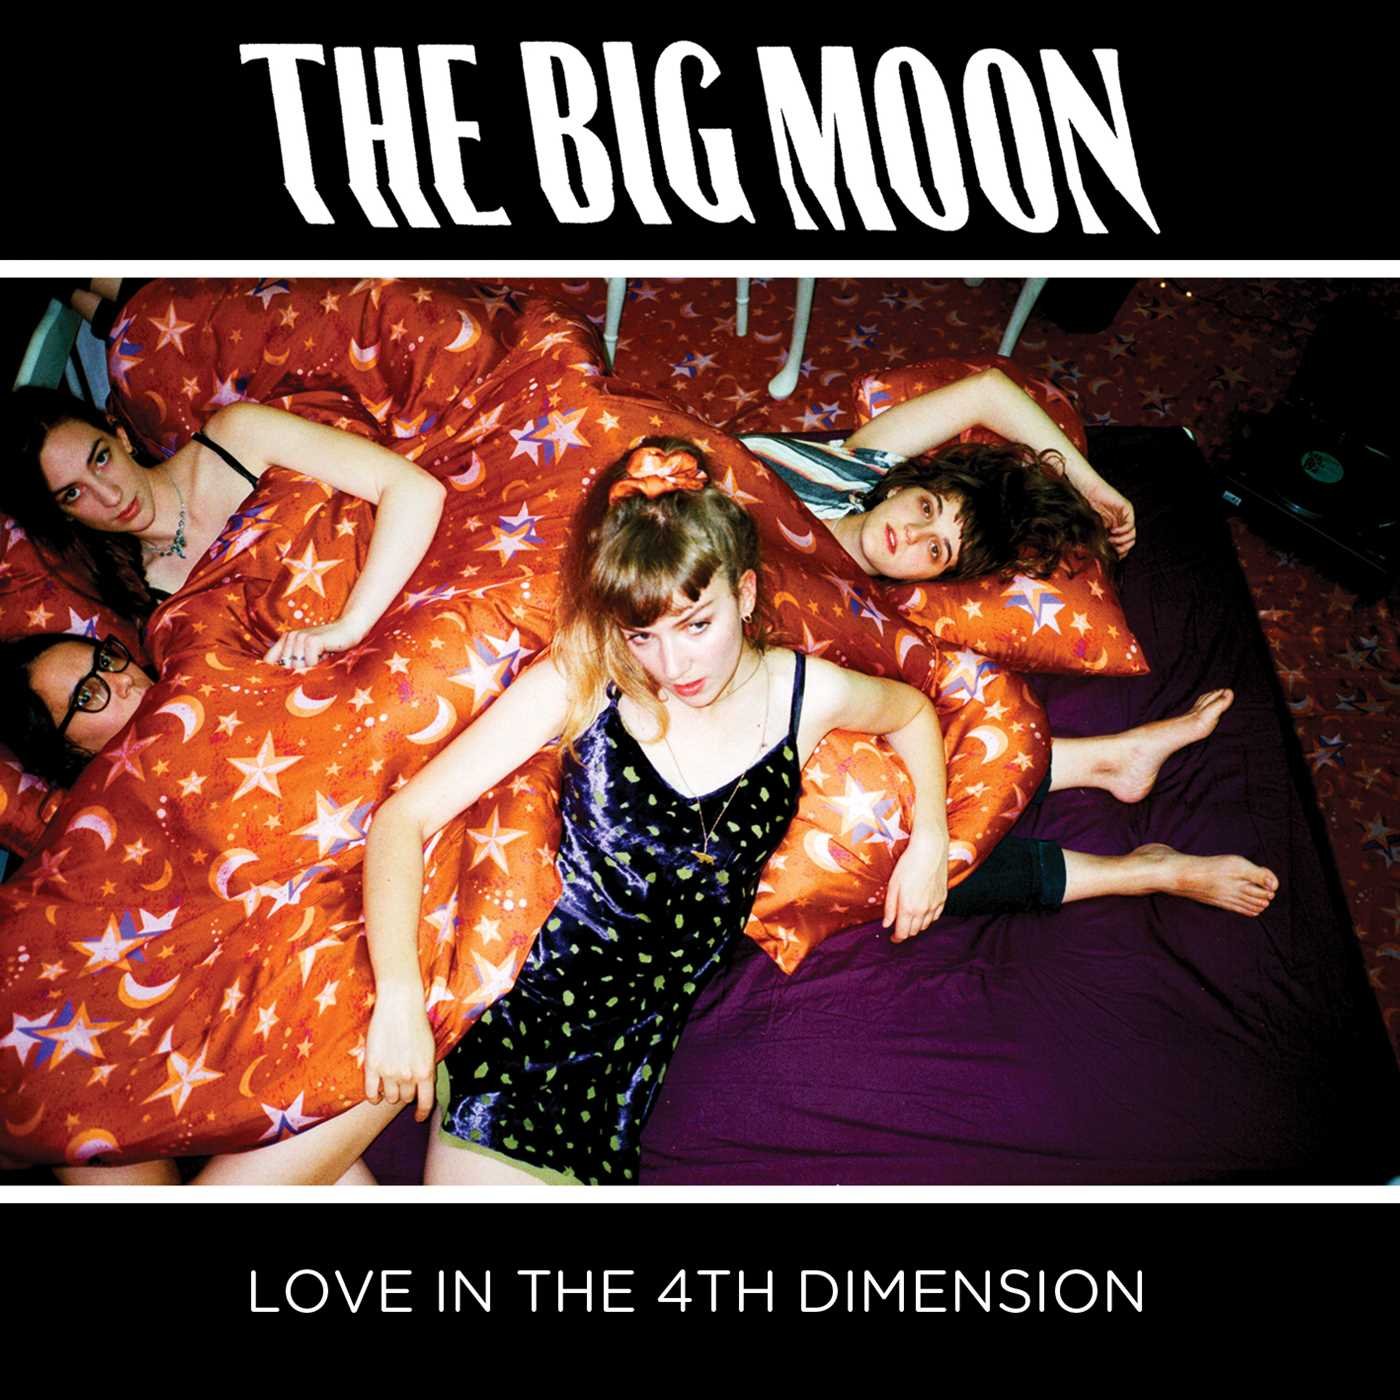 The Big Moon "Love in the 4th Dimension" Limited Purple LP+Mini CD + Poster + Download